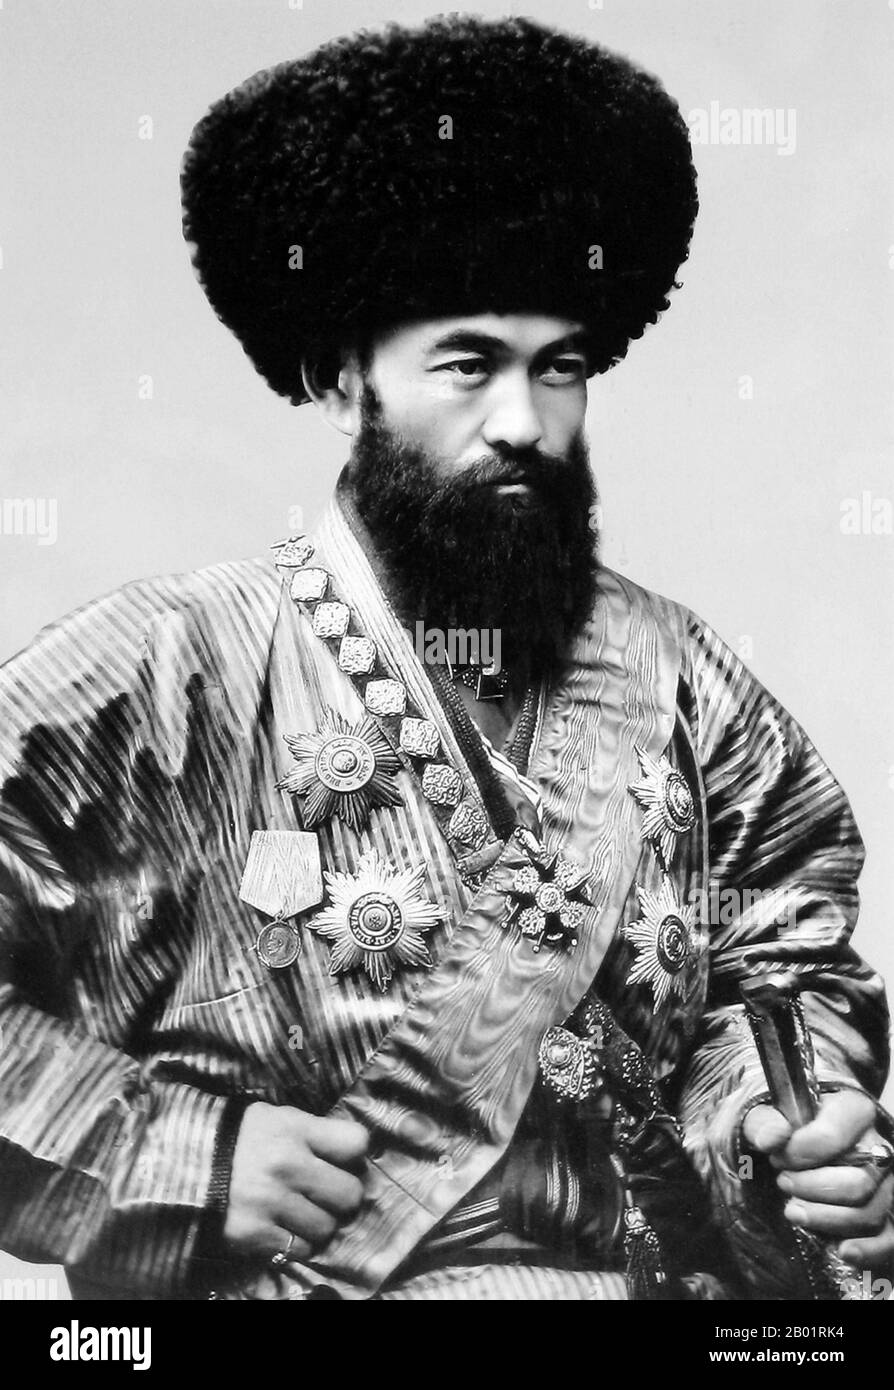 Uzbekistan: Islam Khoja (1872 - 9 August 1913), Prime Minister of the Khanate of Khiva (r. 1907-1911), c. 1913.  Islam Khoja was the chief adviser and prime minister of Khan Muhammad Rahim. He introduced various reforms including establishing a secular school, hospital, pharmacy, post office and cotton factory. Stock Photo